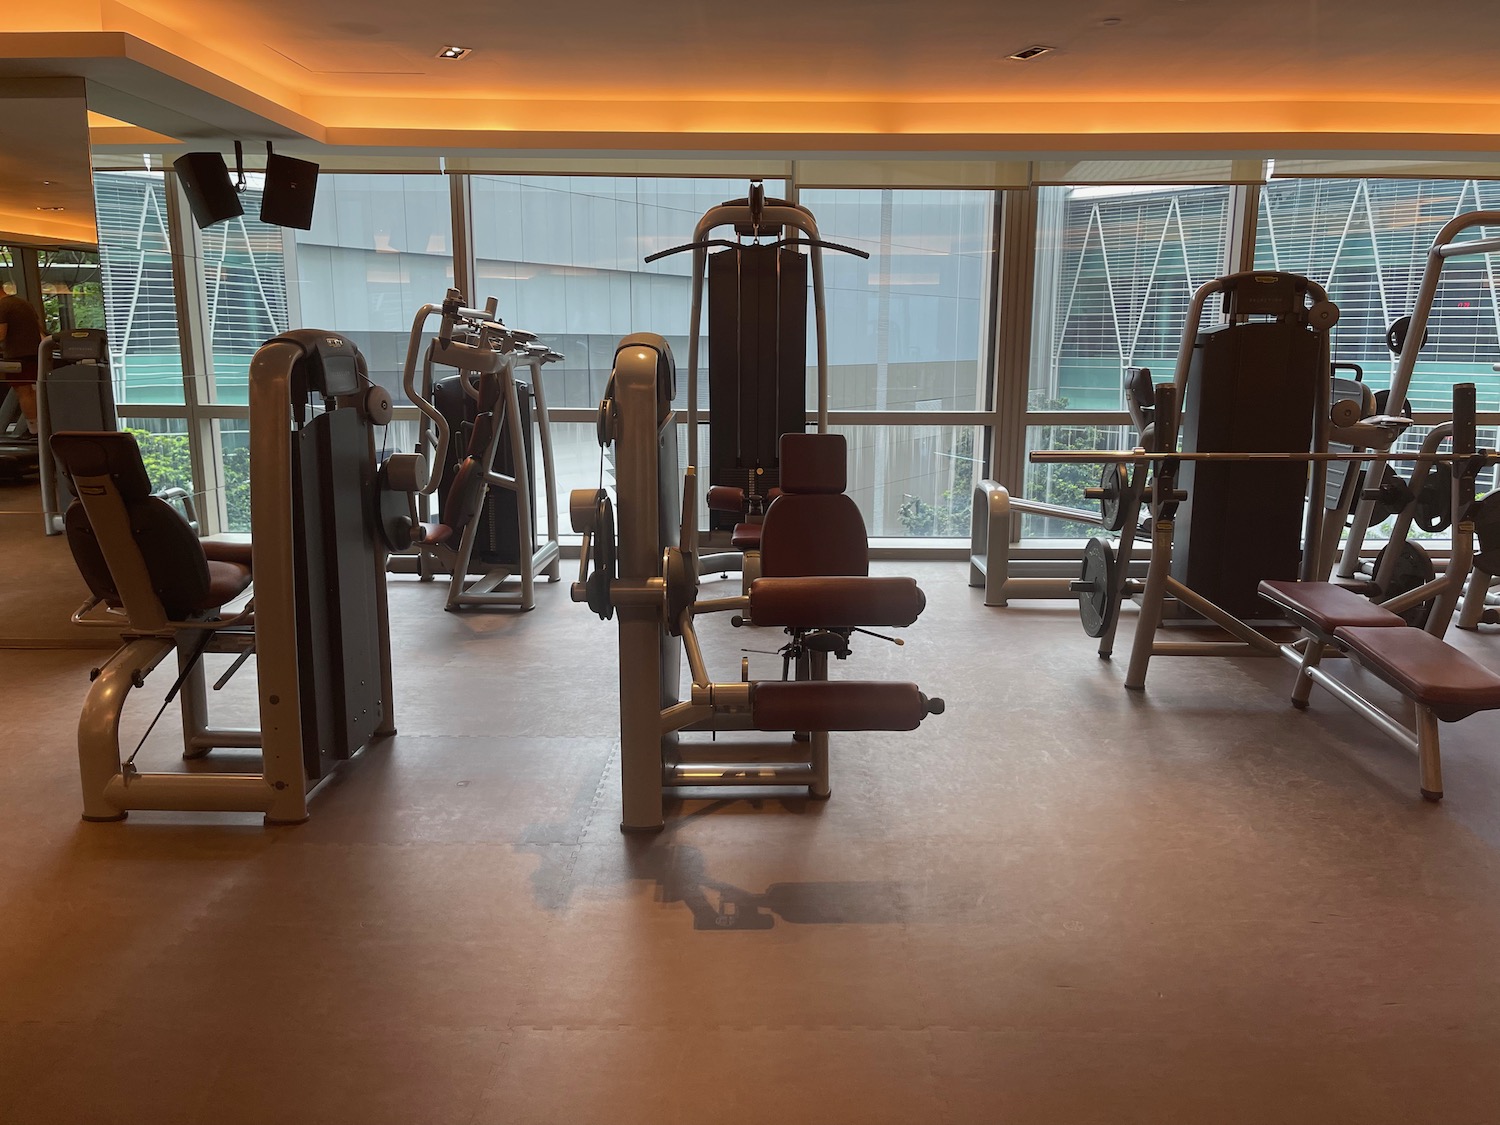 a room with several exercise equipment